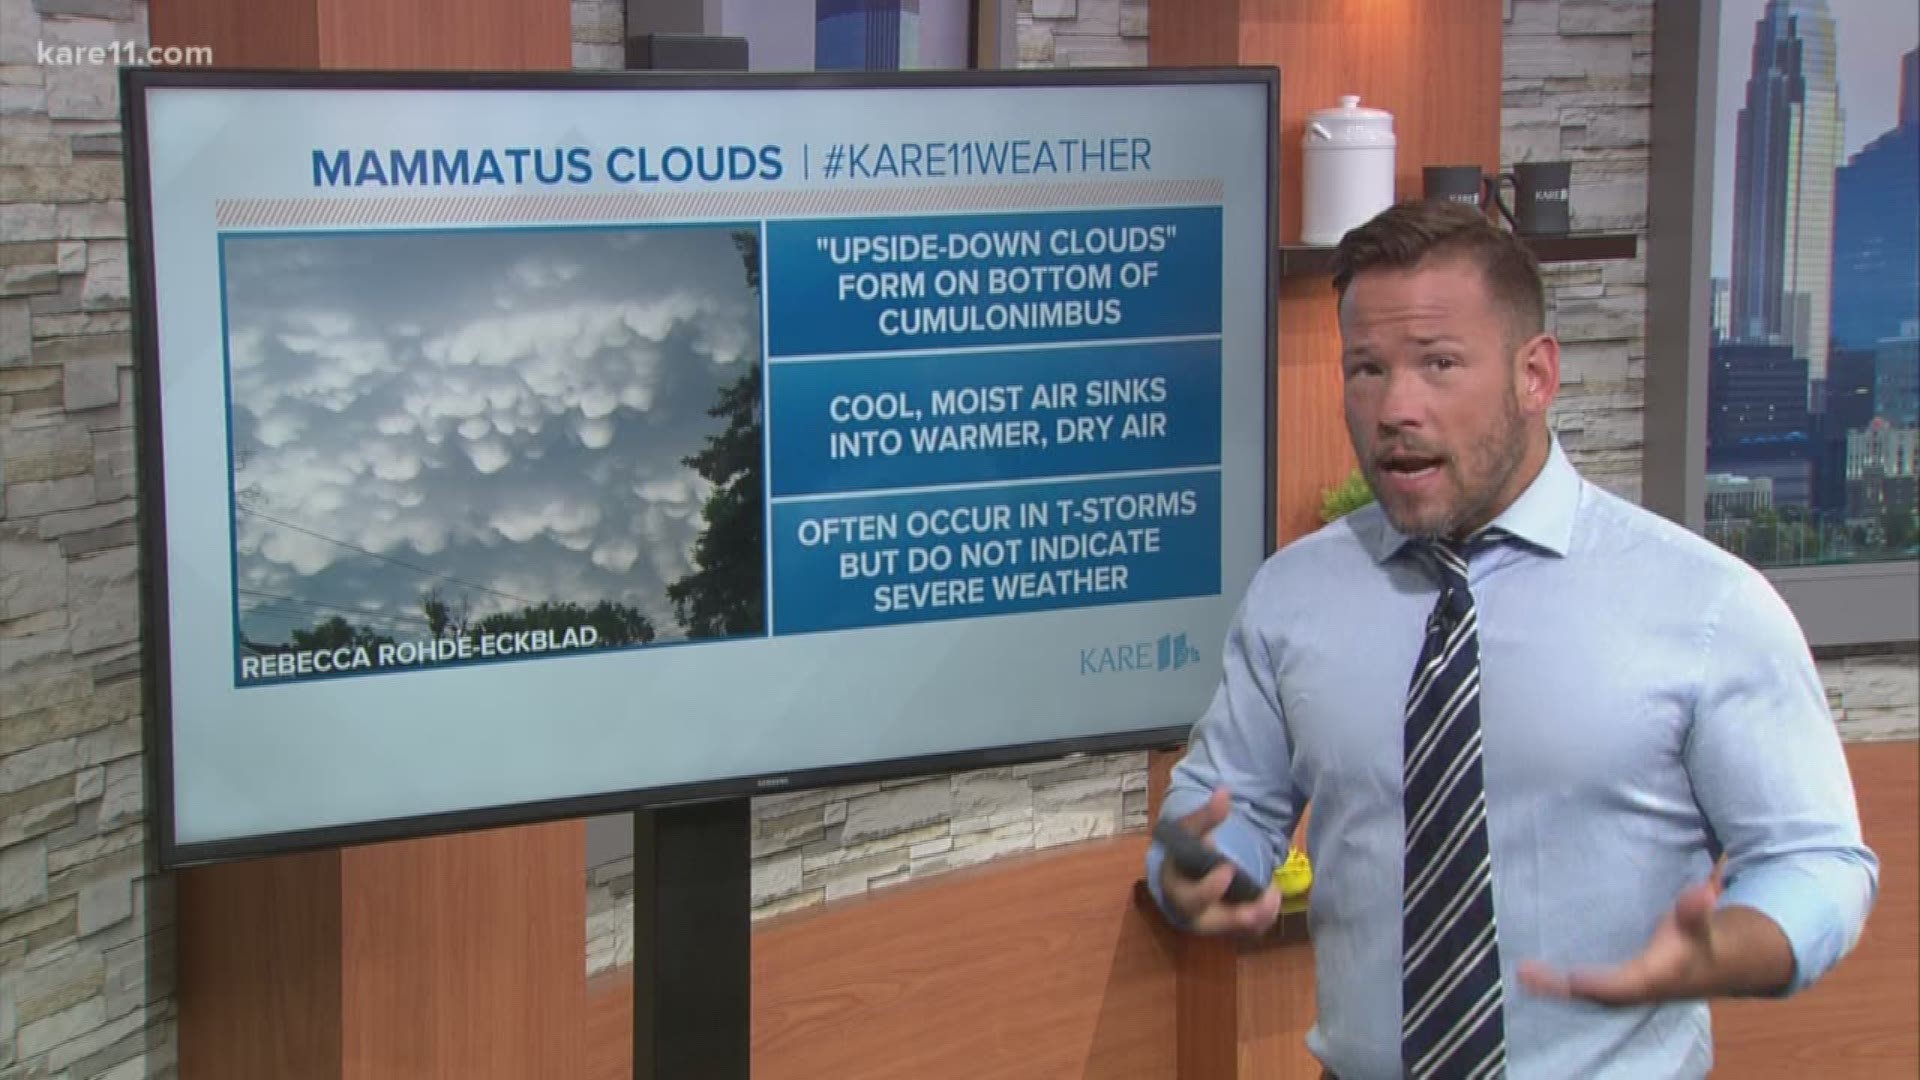 KARE 11 viewers noticed some ominous clouds remaining in the sky after the storm passed through Monday night. Sven says they are called Mammatus Clouds, and explains how they form.